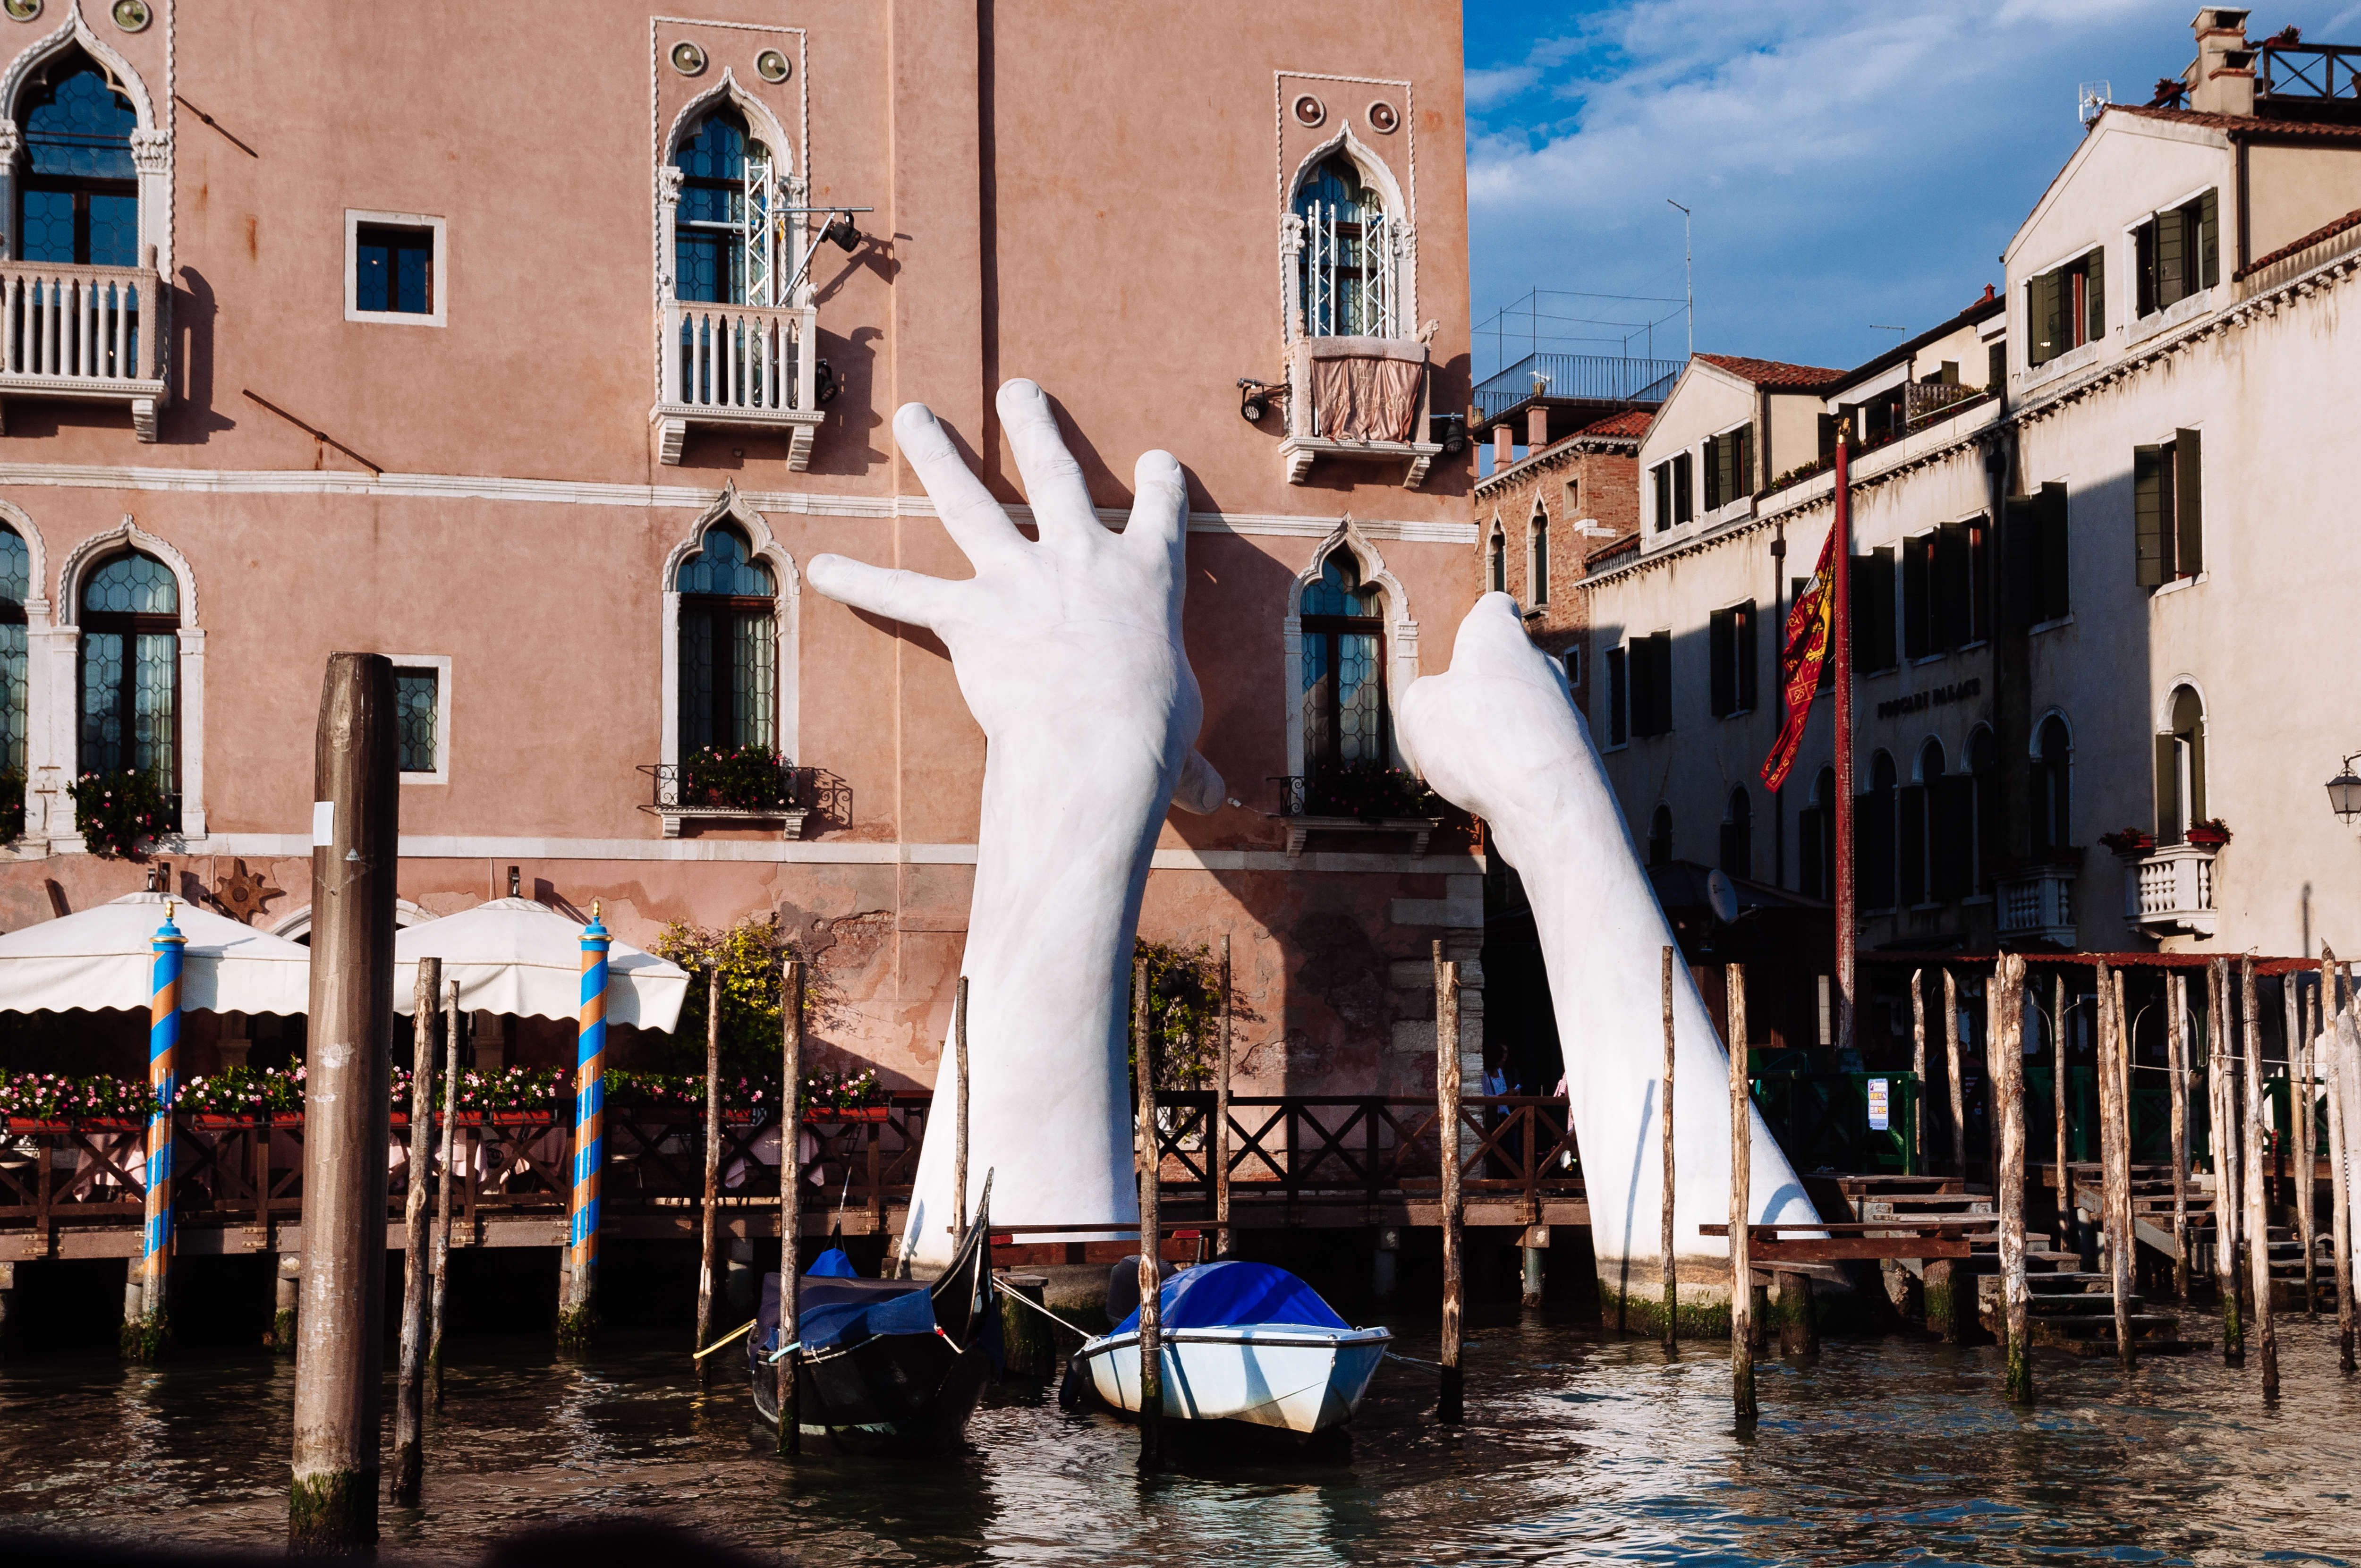 Sculpture of two large white hands rising out of canal